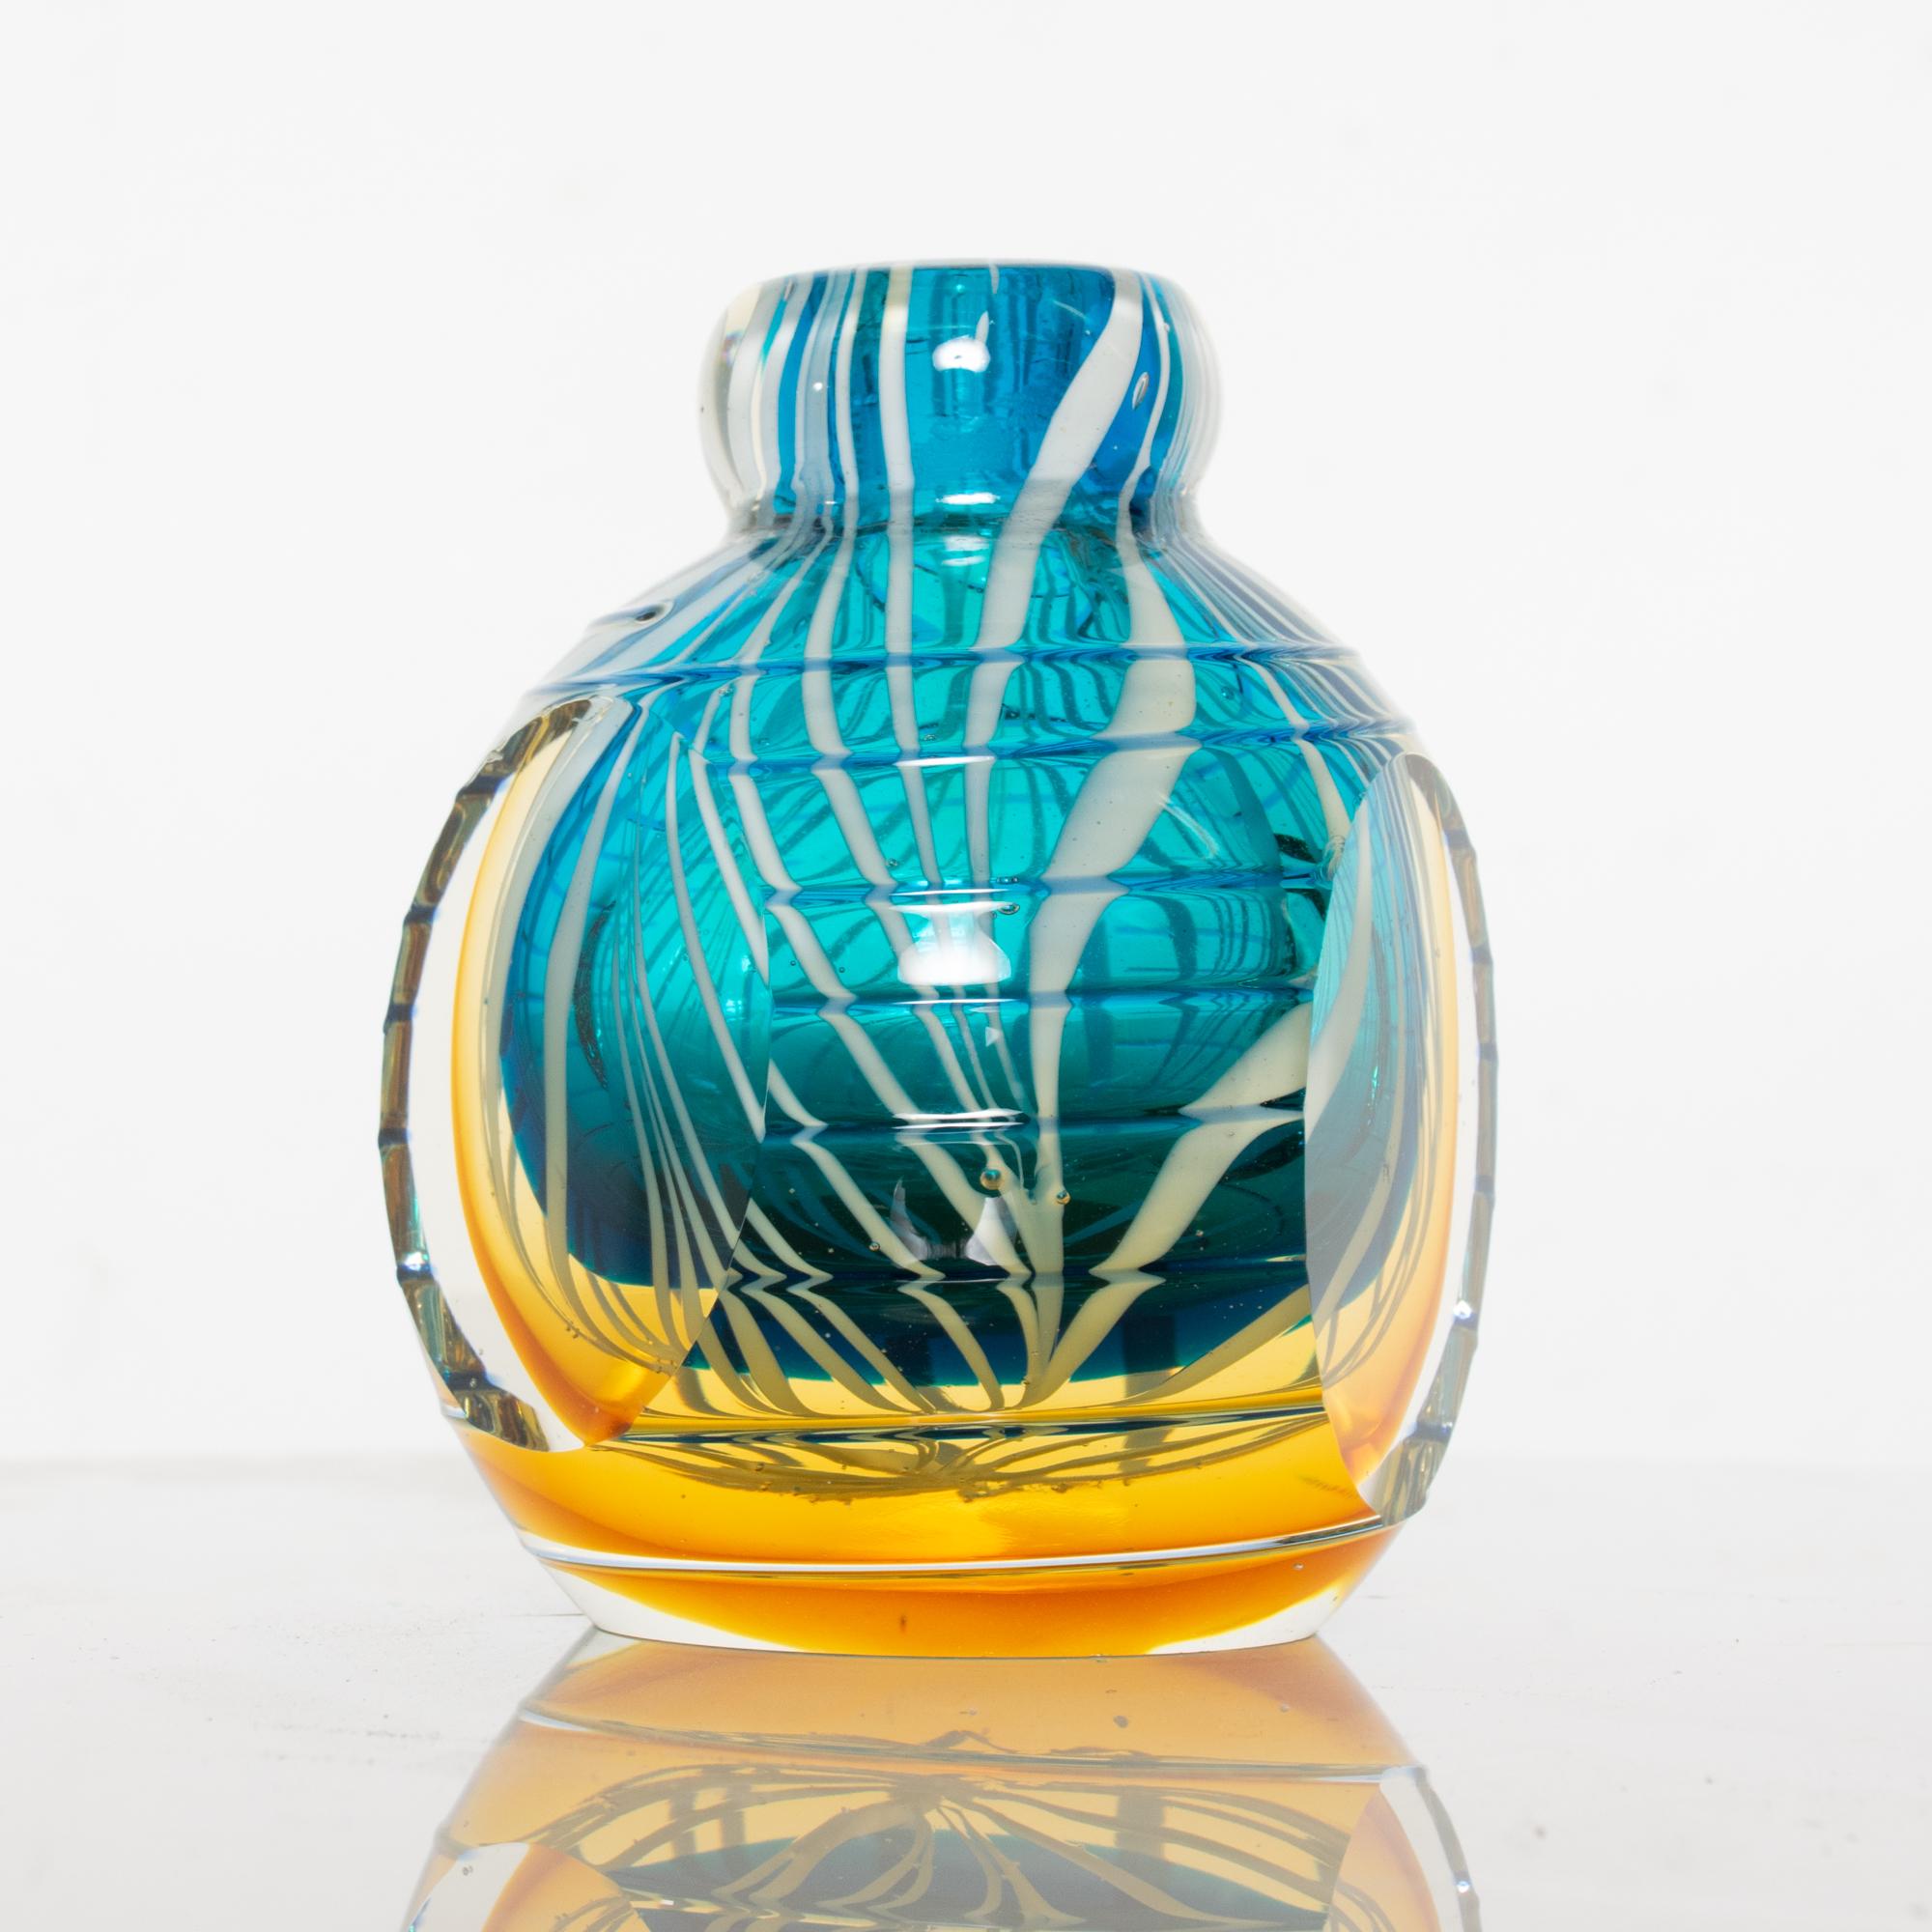 Lovely vivid blue gold and white swirled Venetian vase vintage magical hand blown Murano glass, Italy.

Difficult to read maker stamp attributed to Murano, Italy, circa 1970s

Dimensions: 5